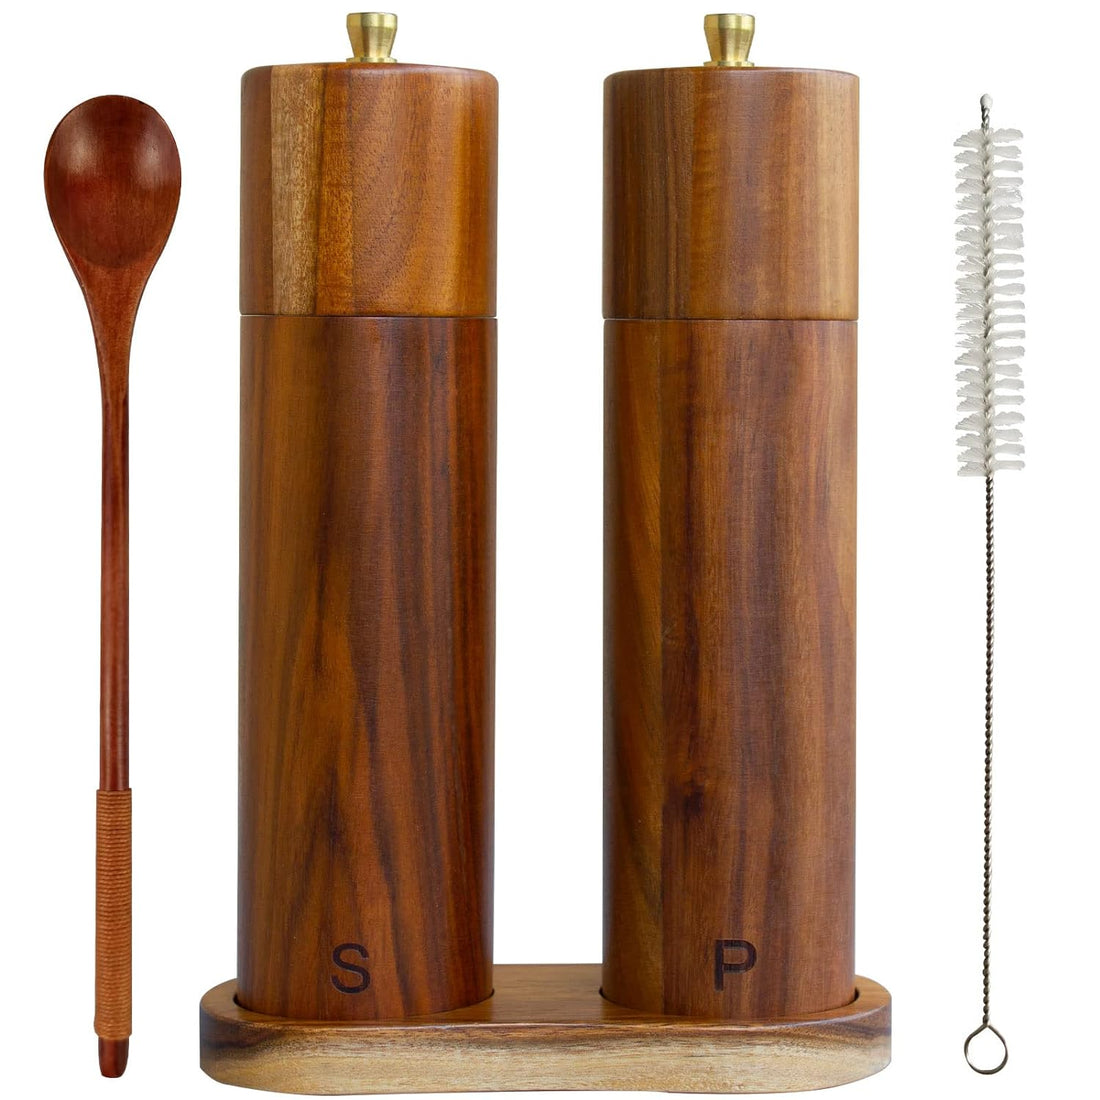 YVAKE Wooden Salt and Pepper Grinder Set,8 Inch Manual Acacia Wood Pepper Mill, Adjustable Coarseness and Refillable,Gift Set for Kitchen[Set of 2]